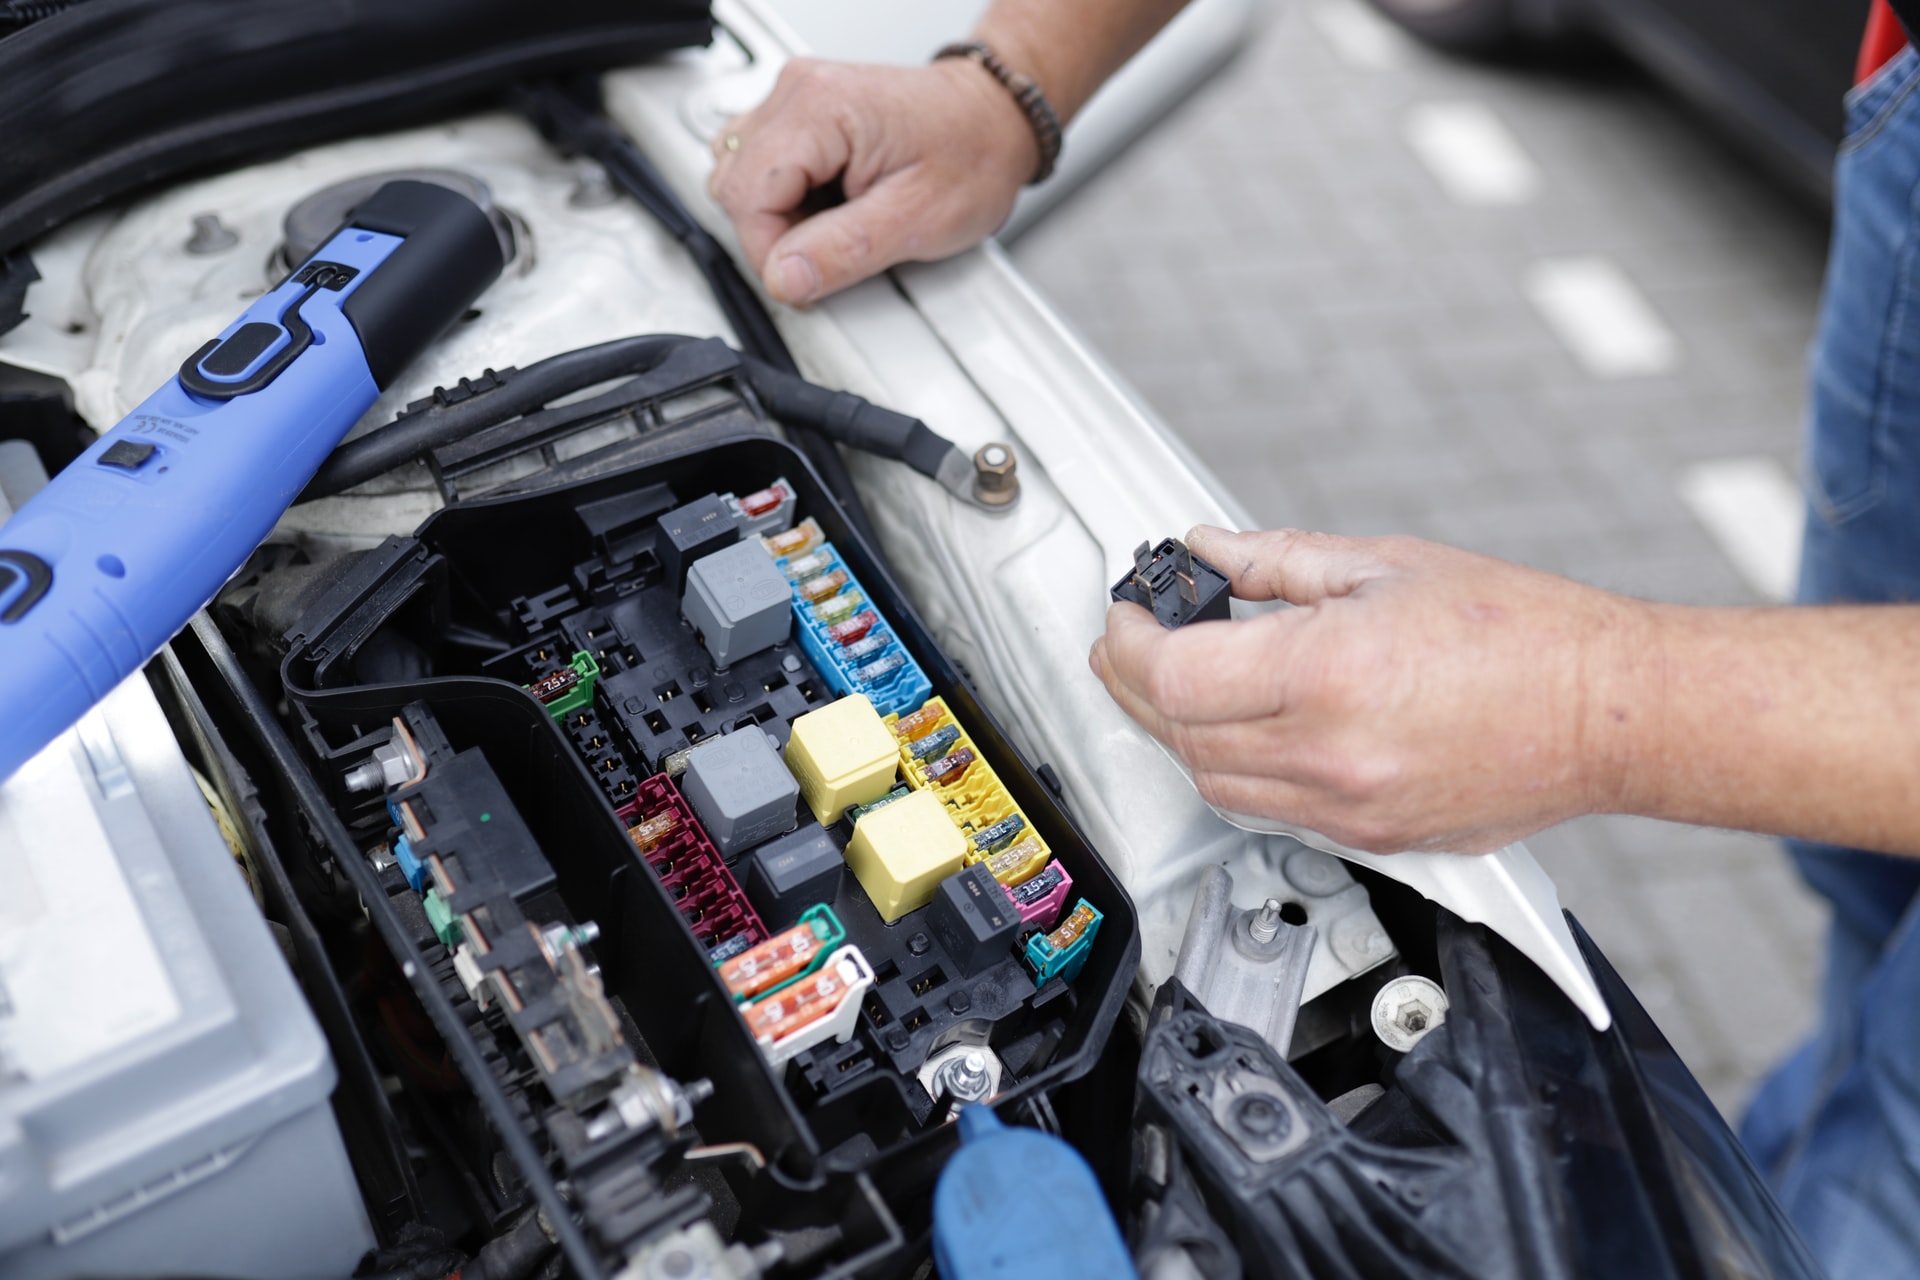 Why is gear oil important for your car?